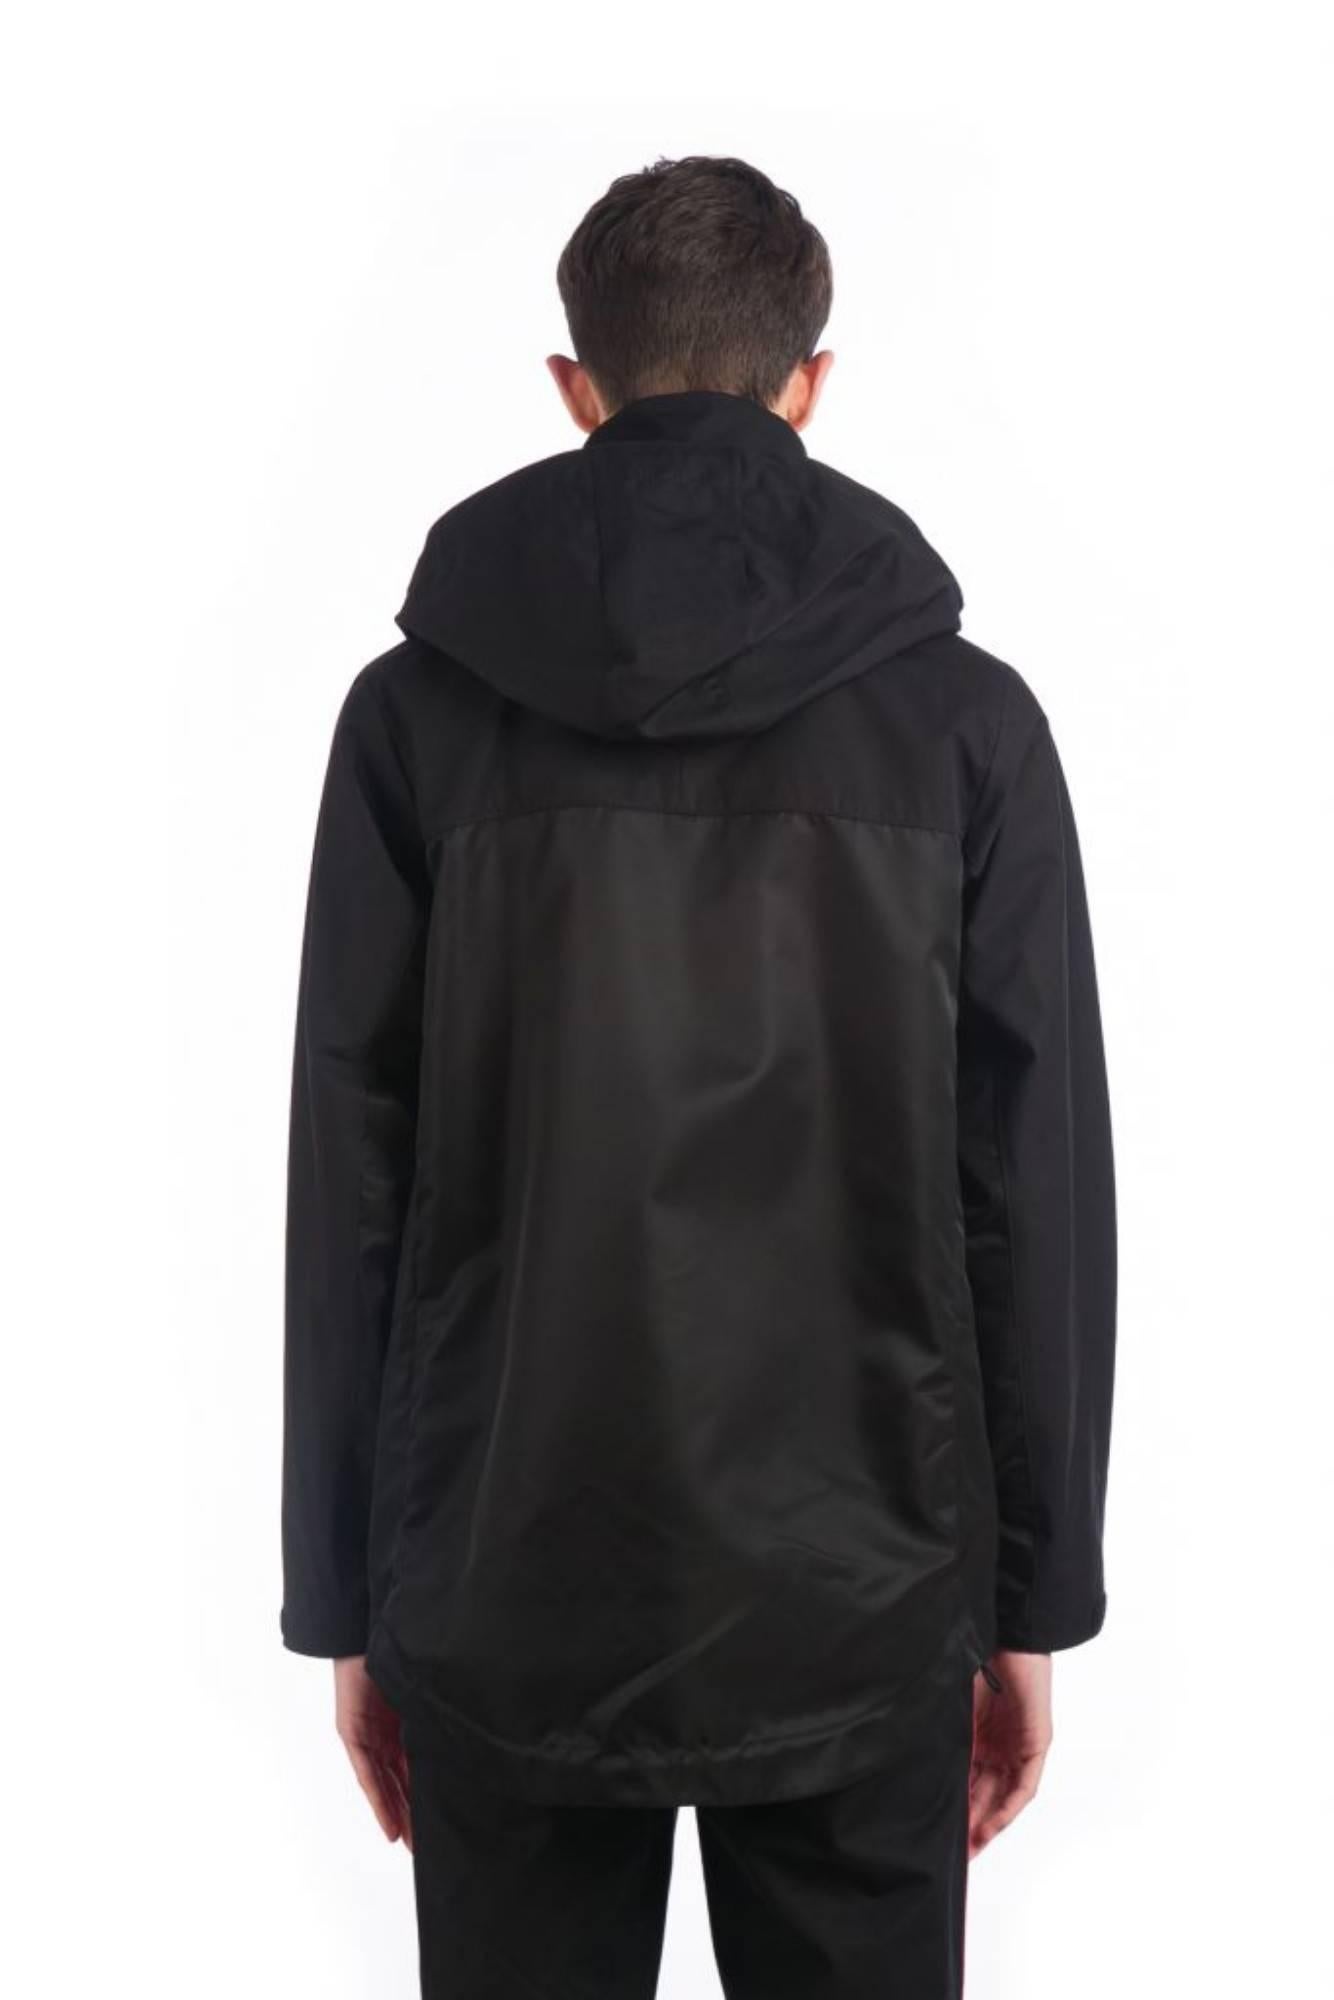 Black Givenchy Zip Jacket (Size - 50) For Sale